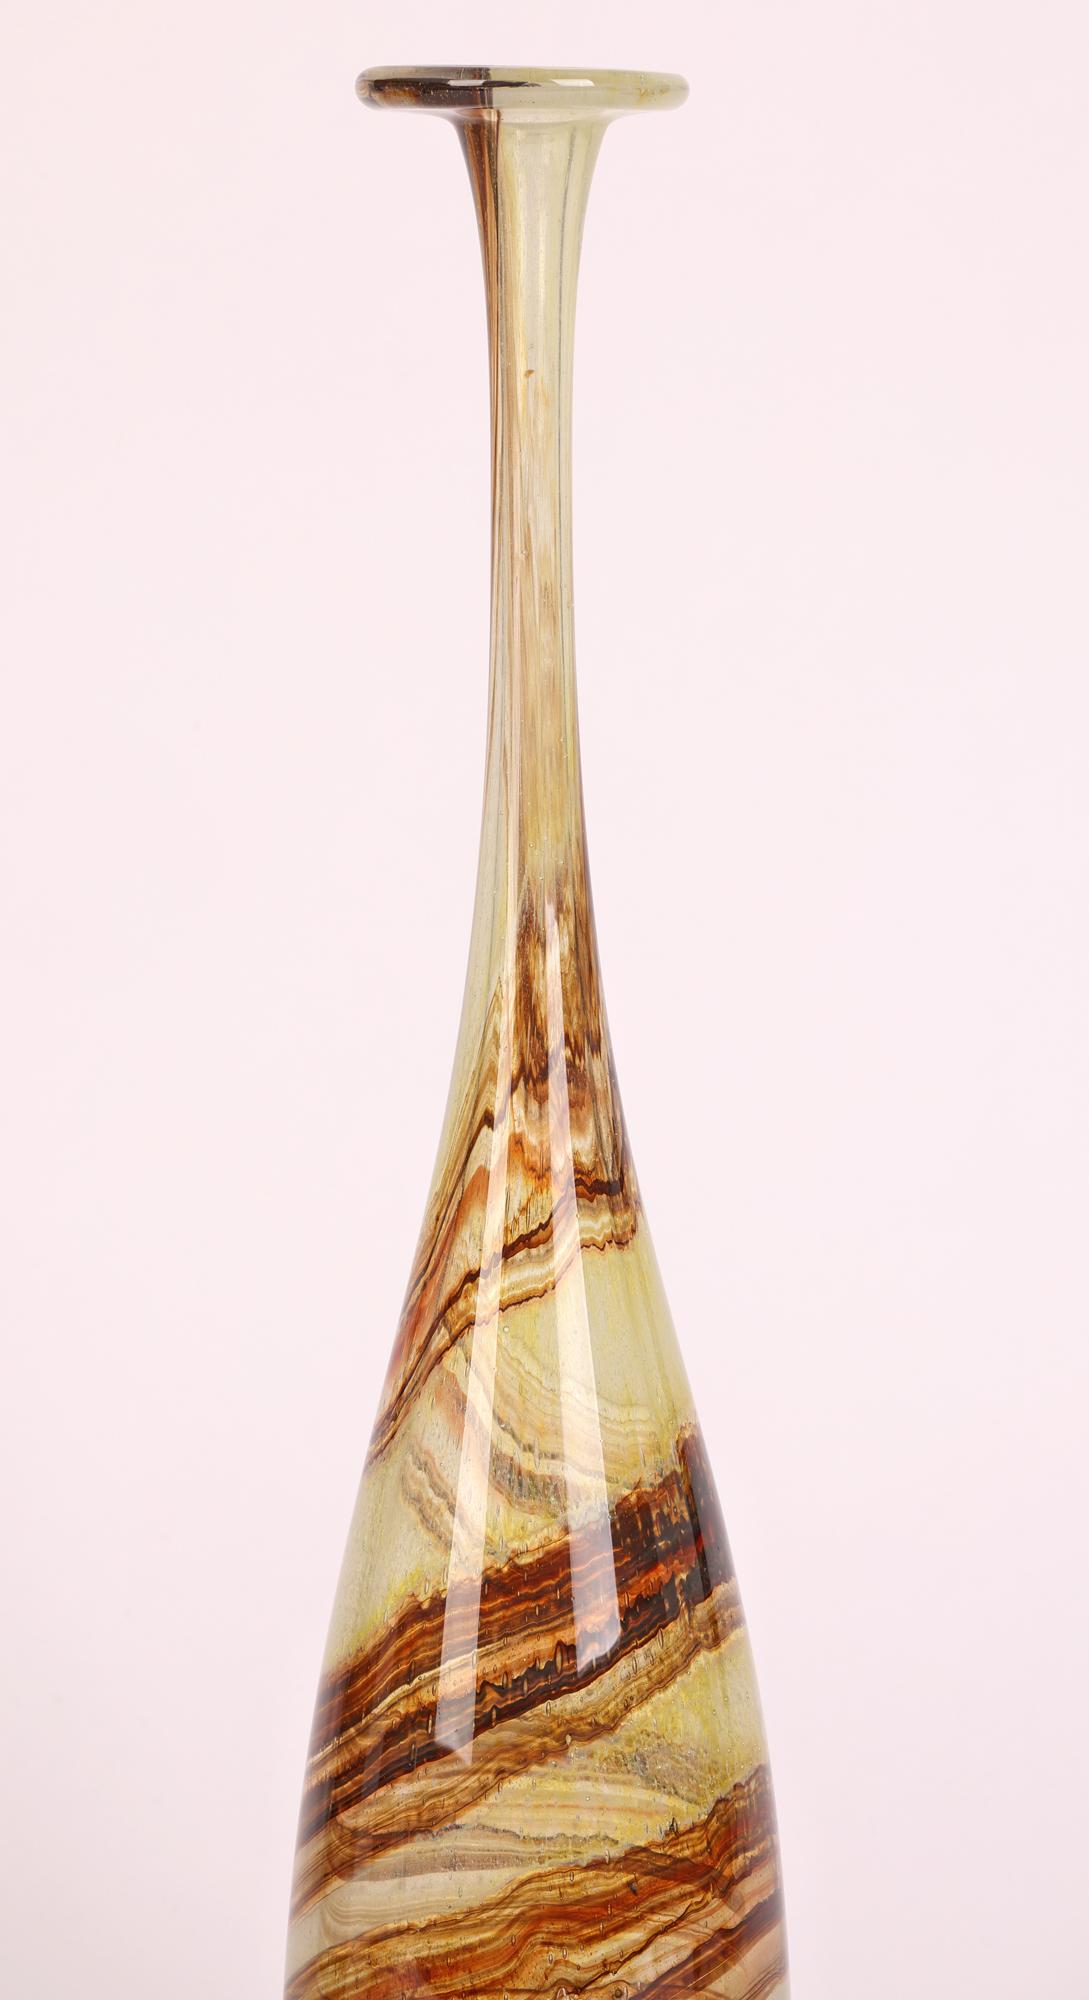 A tall and stylish vintage art glass bottle vase made by Michael Harris (British, 1933-1994) at the Isle of Wight Glass Works in the early 1970’s.

Michael Harris was a renowned glass maker and studied glass design at Stourbridge College of Art